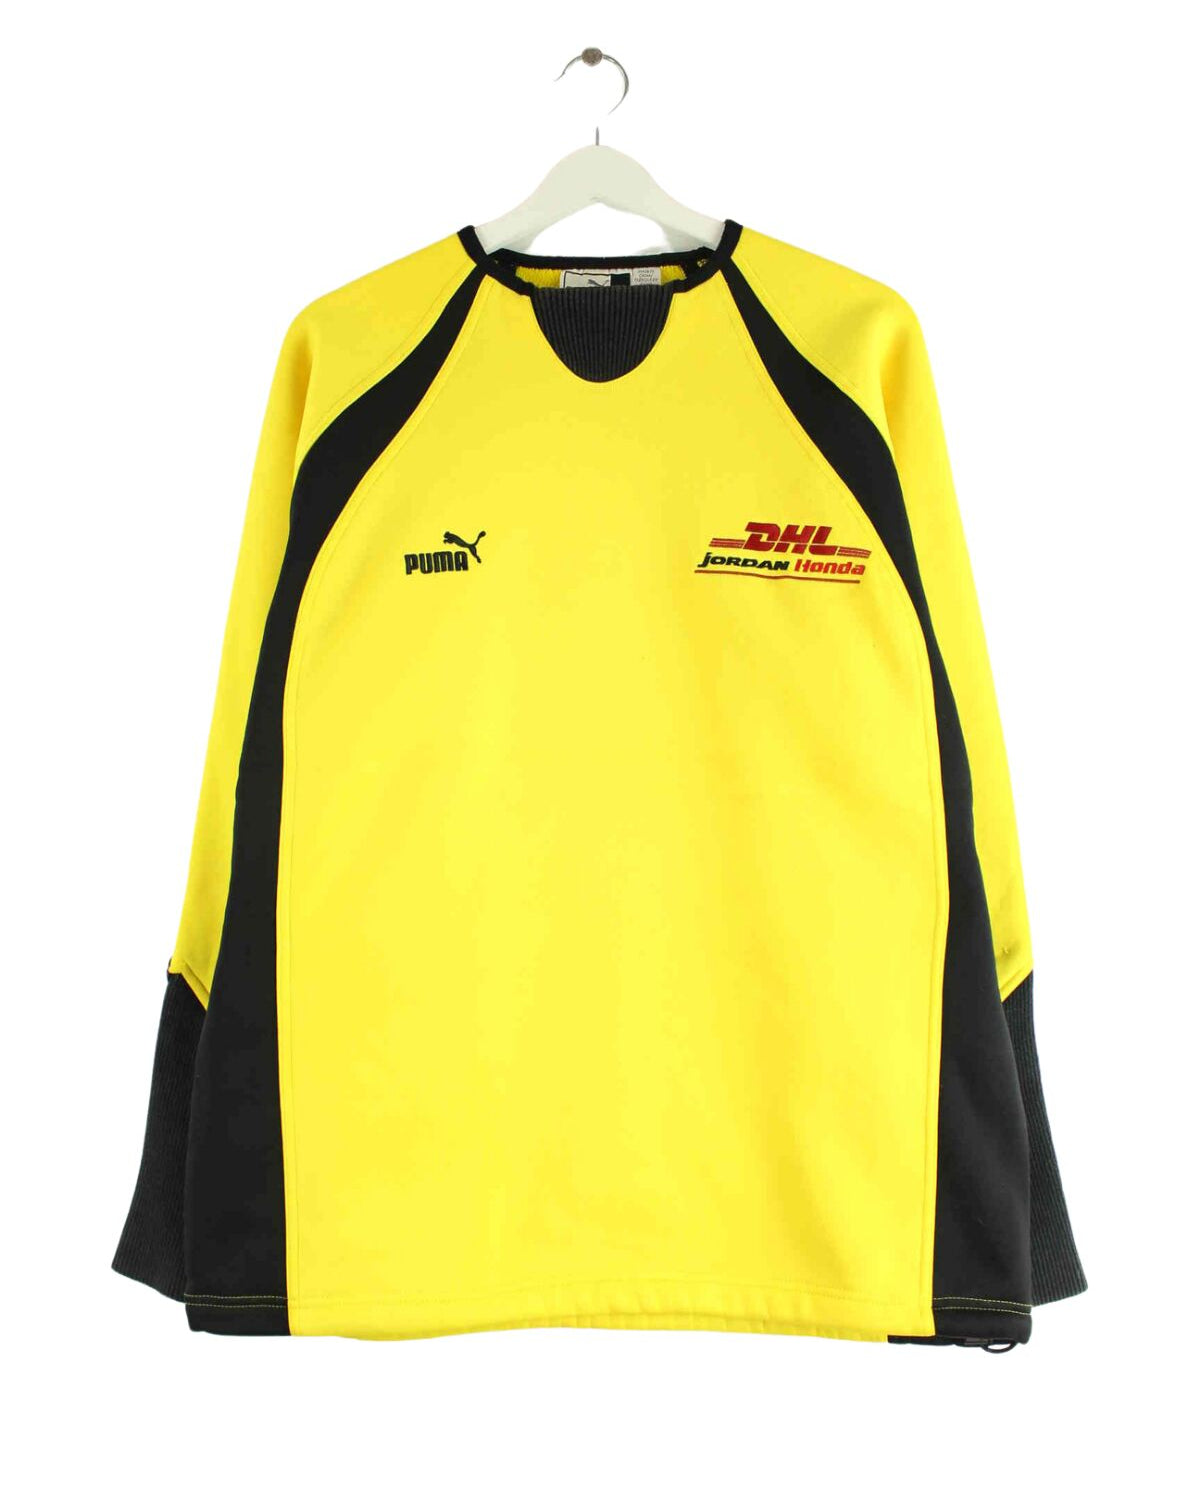 Puma 00s DHL Embroidered Sweater Gelb M (front image)